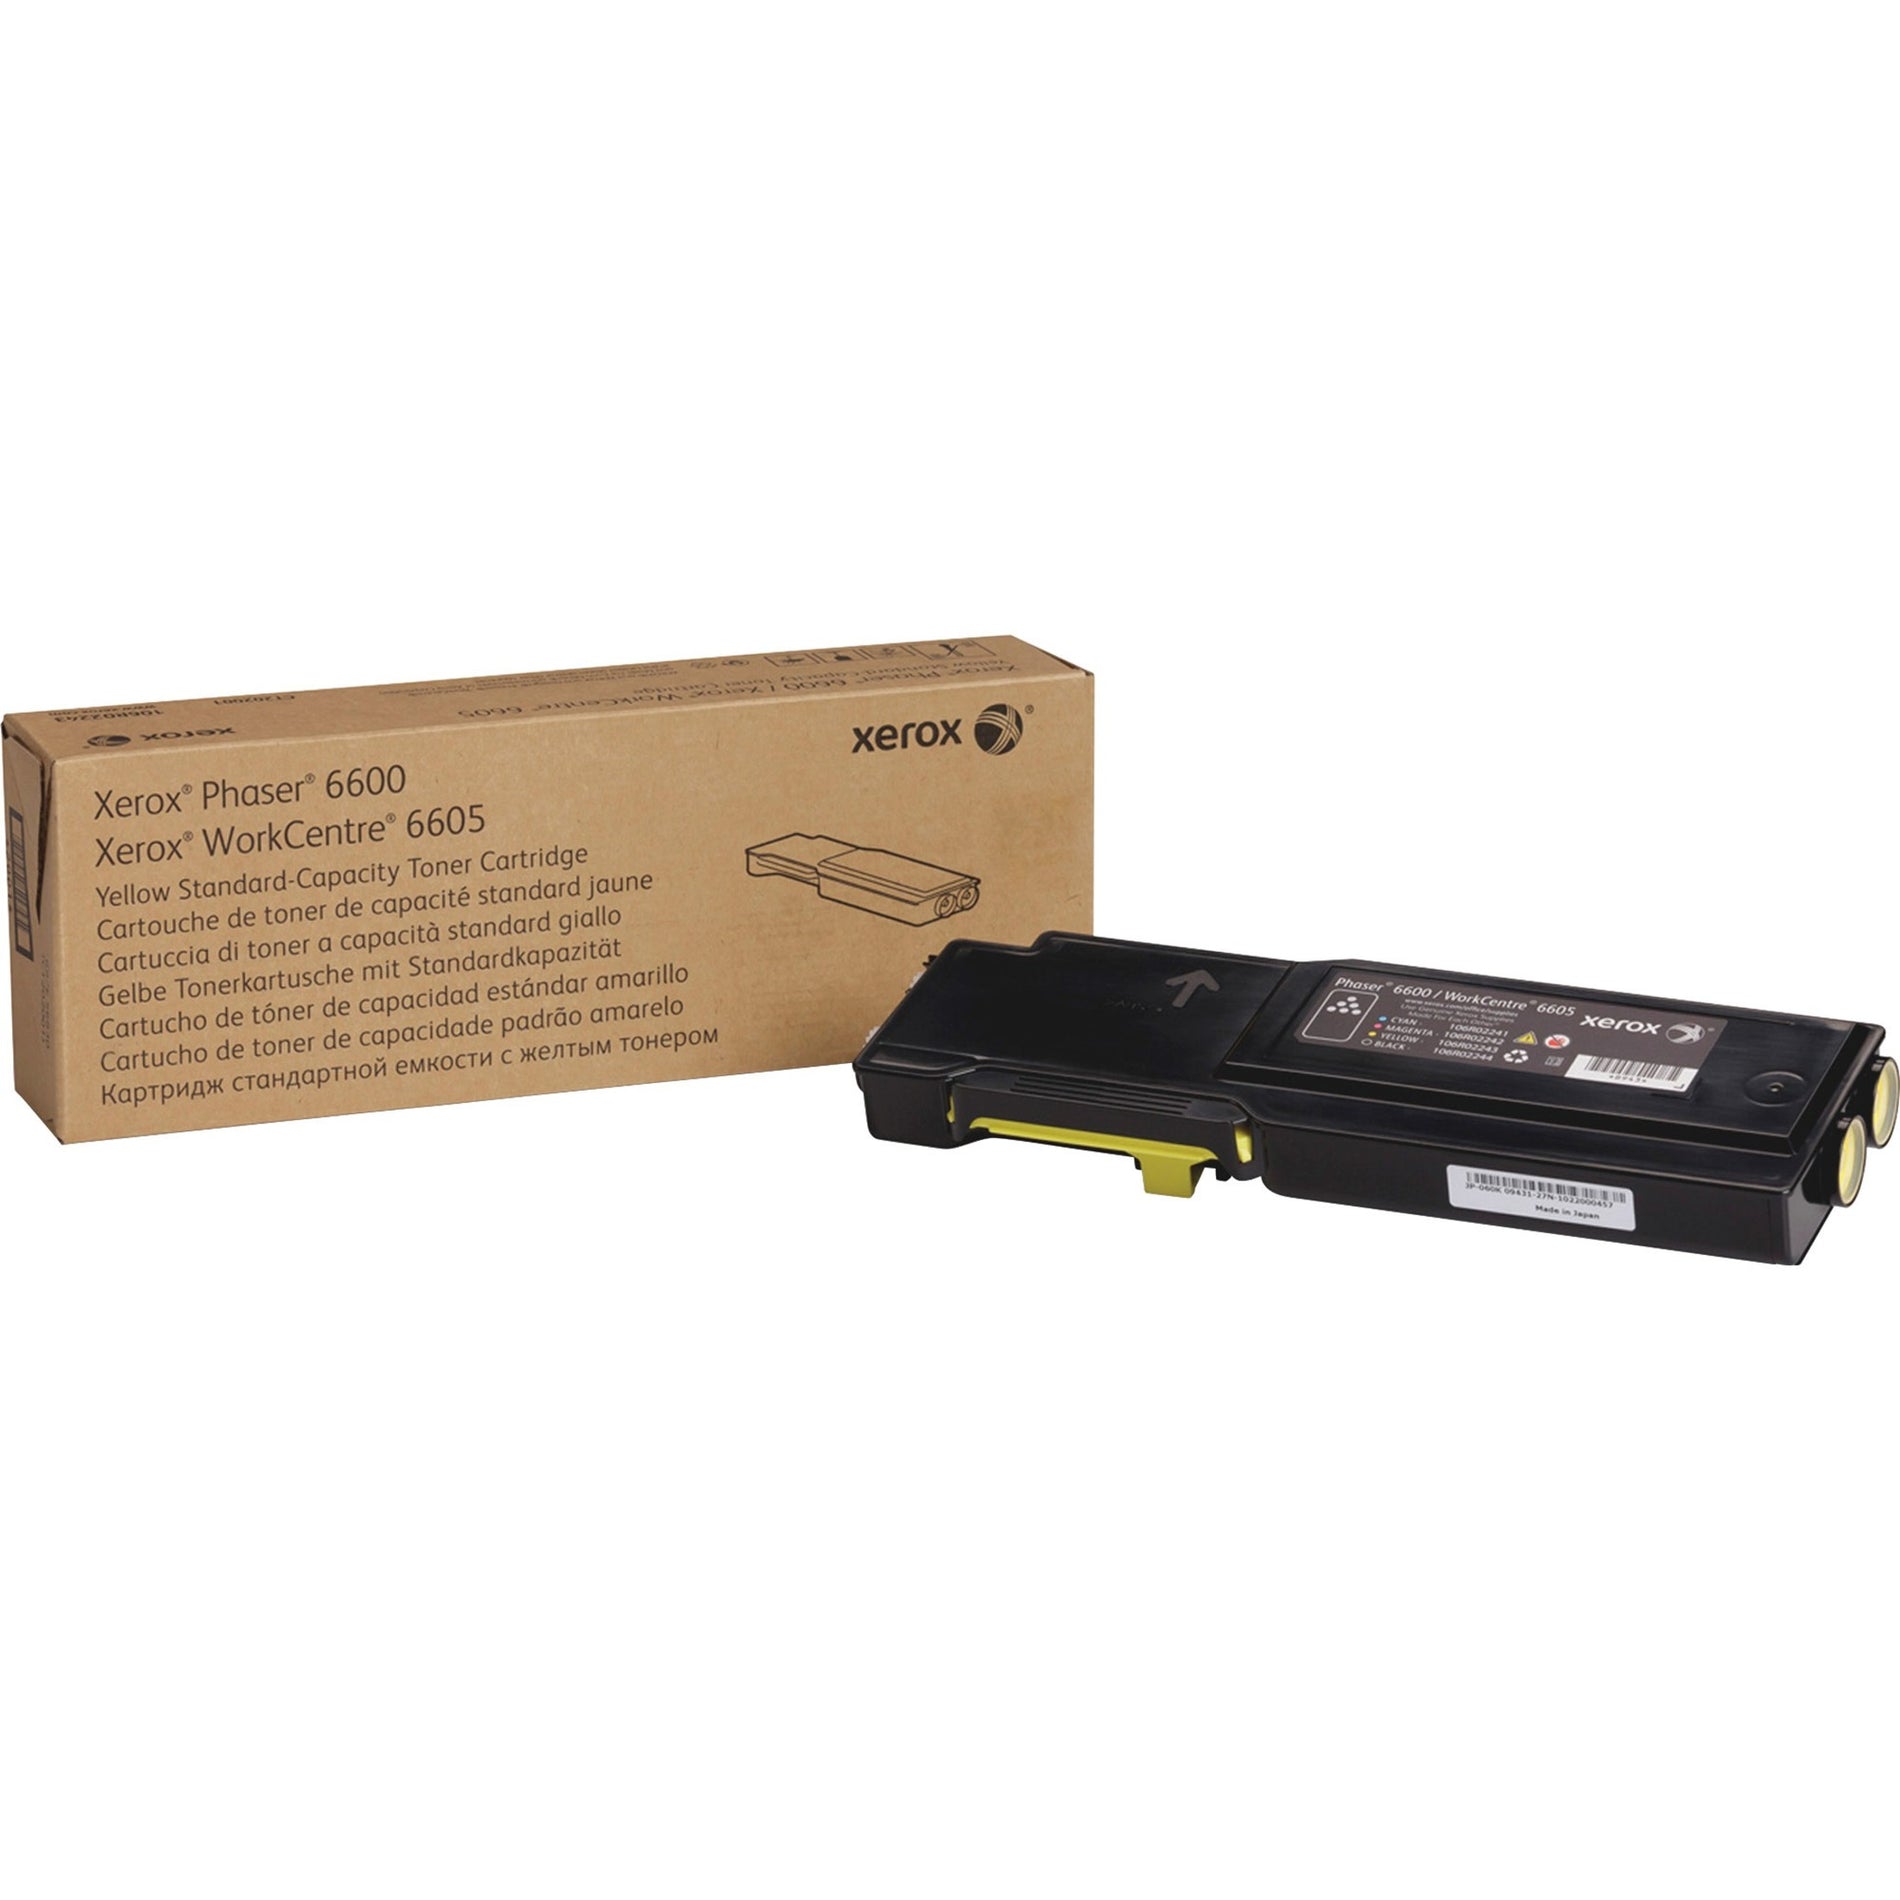 Xerox 106R02243 Phaser 6600/WorkCentre 6605 Standard Toner Cartridge, 2,000 Page Yield, Yellow